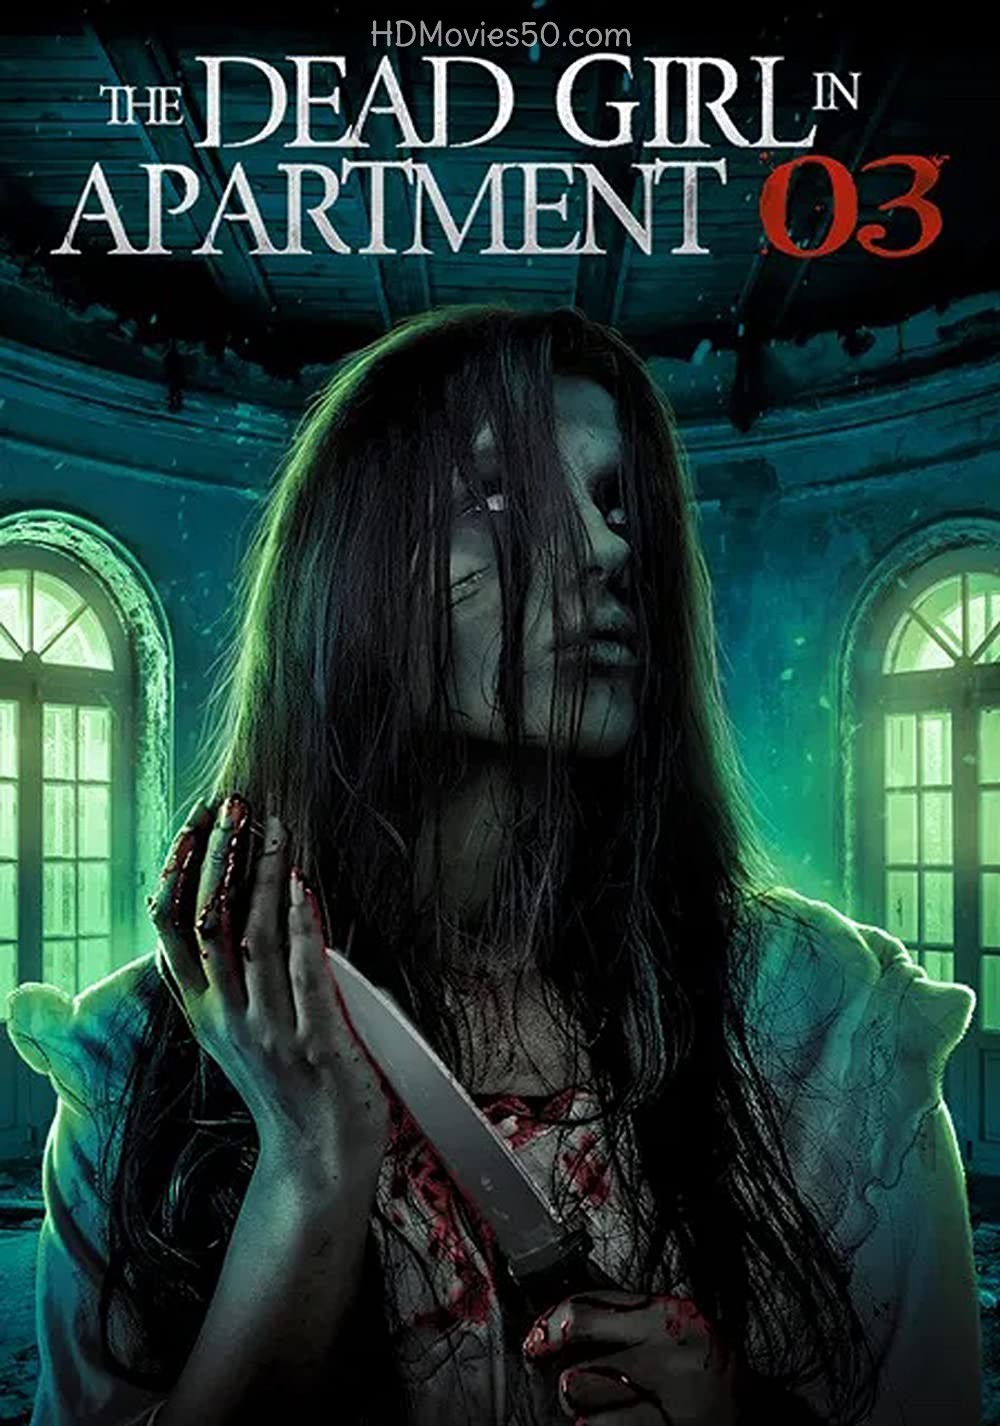 Download The Dead Girl in Apartment 03 2022 English Movie 720p AMZN HDRip 800MB